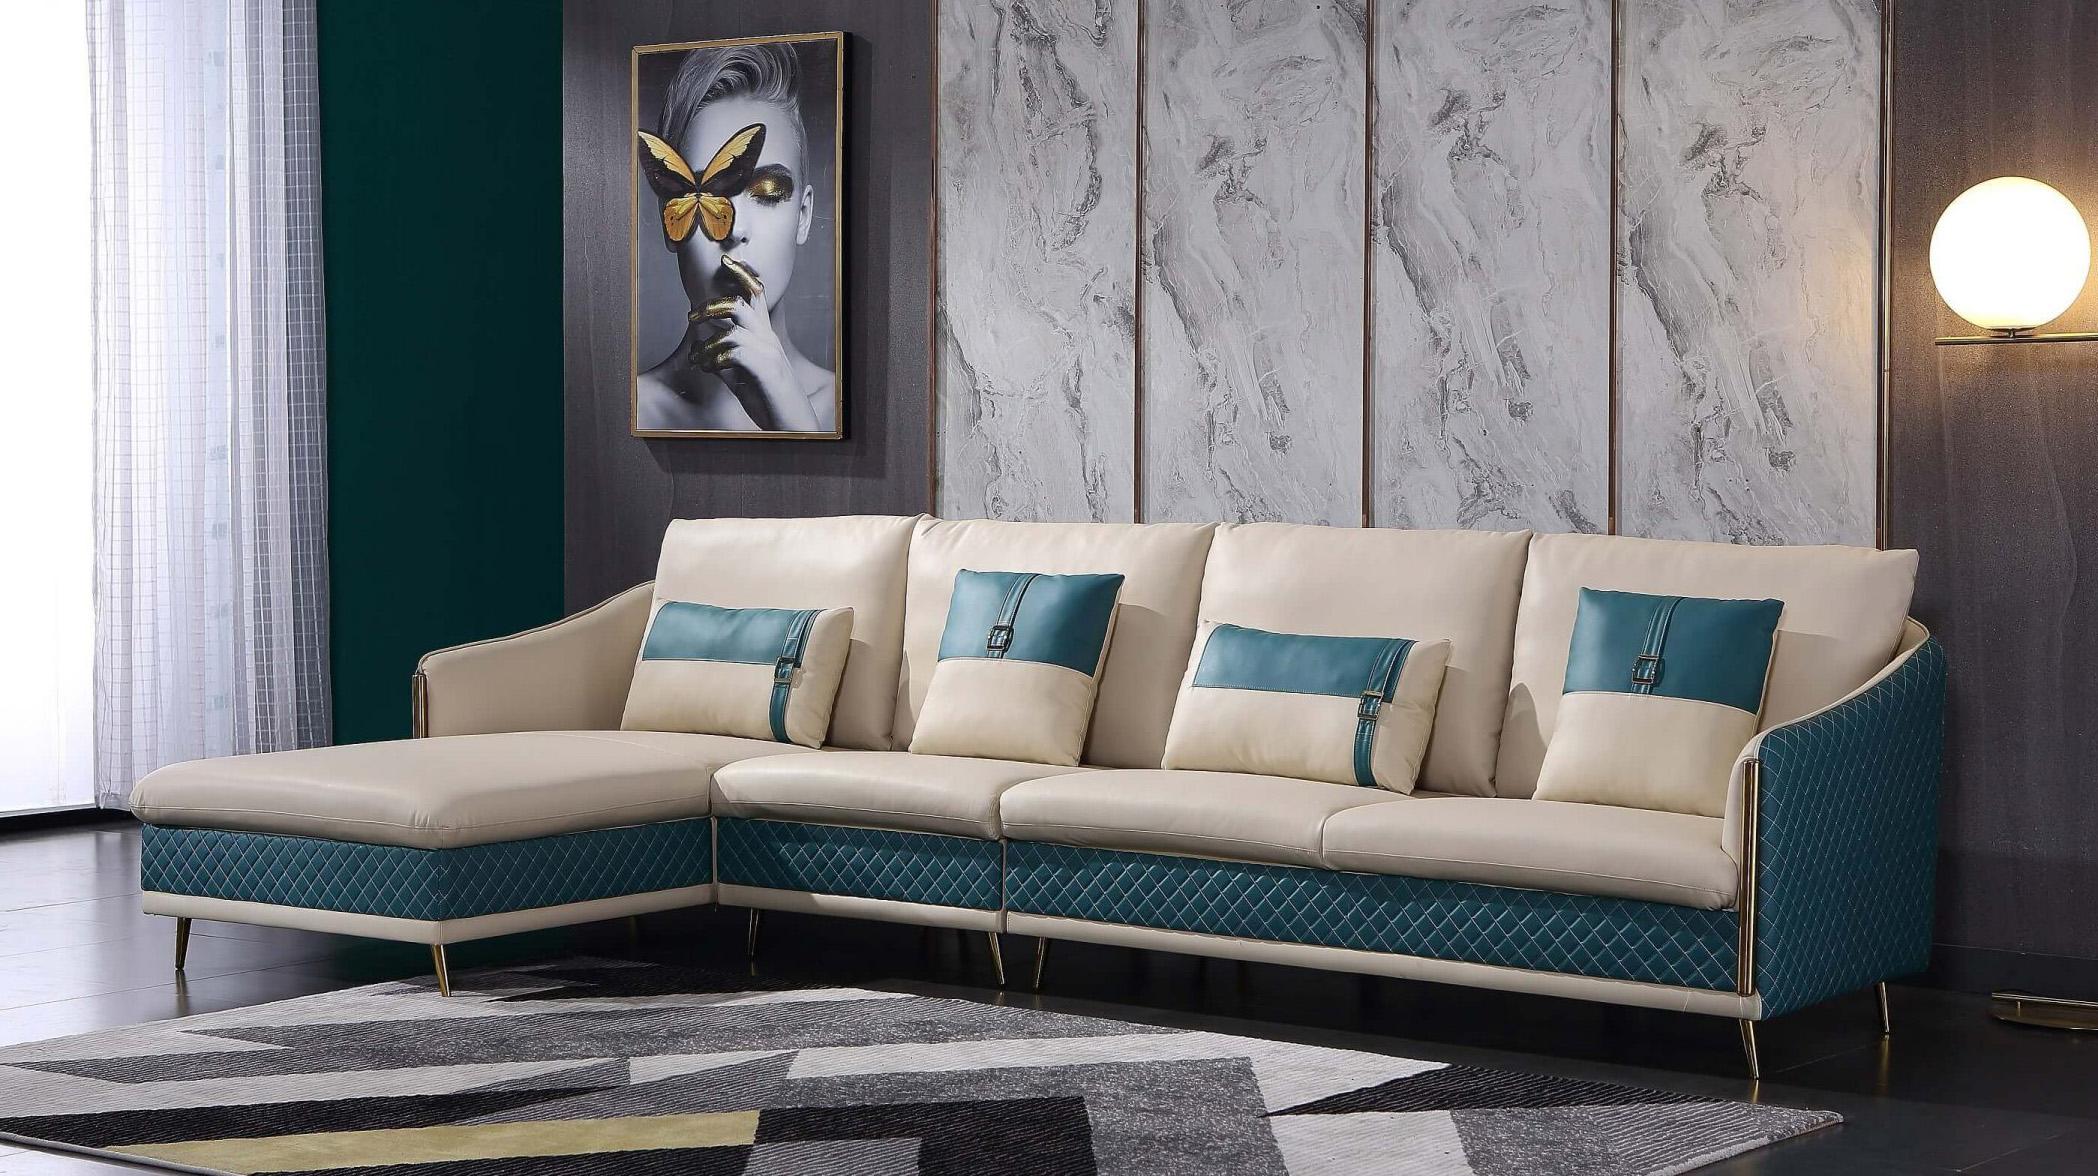 Modern, Vintage 4 Seater Sectional Sofa ICARO EF-64437L-4LHF in Off-White, Blue Italian Leather